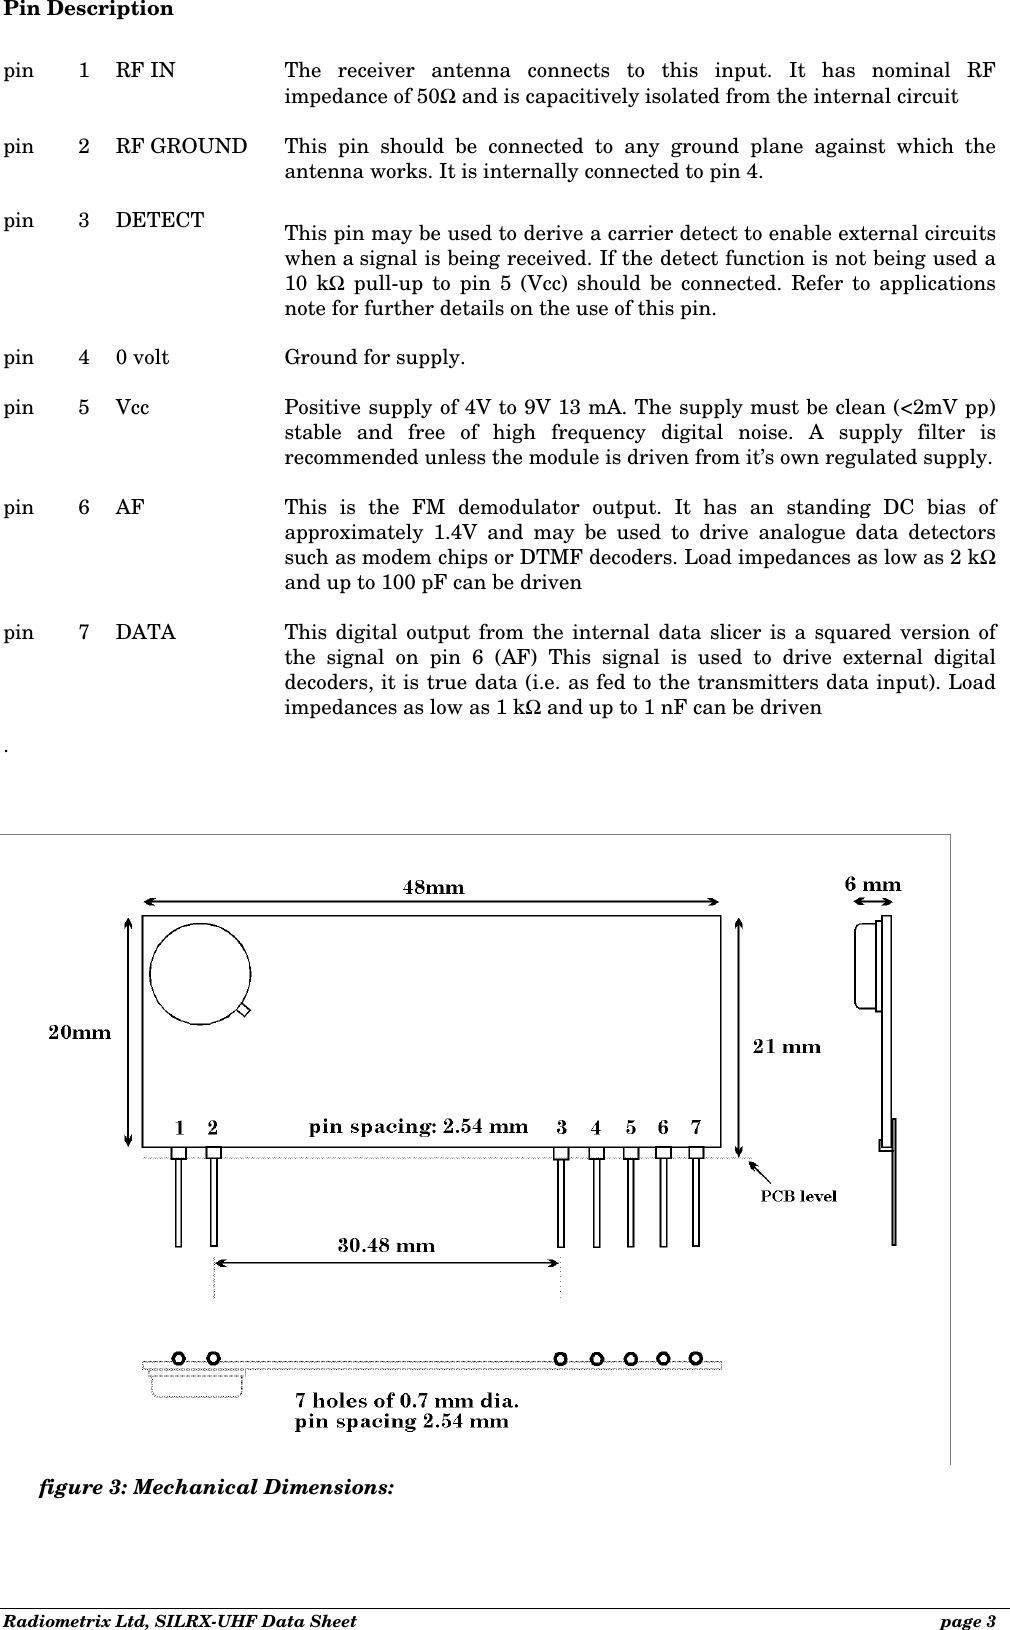 Radiometrix Ltd, SILRX-UHF Data Sheet              page 3 Pin Description  pin   1 RF IN   The receiver antenna connects to this input. It has nominal RF impedance of 50Ω and is capacitively isolated from the internal circuit  pin   2 RF GROUND This pin should be connected to any ground plane against which the antenna works. It is internally connected to pin 4.  pin 3 DETECT This pin may be used to derive a carrier detect to enable external circuits when a signal is being received. If the detect function is not being used a 10 kΩ pull-up to pin 5 (Vcc) should be connected. Refer to applications note for further details on the use of this pin.  pin   4 0 volt Ground for supply.  pin   5 Vcc Positive supply of 4V to 9V 13 mA. The supply must be clean (&lt;2mV pp) stable and free of high frequency digital noise. A supply filter is recommended unless the module is driven from it’s own regulated supply.  pin 6 AF This is the FM demodulator output. It has an standing DC bias of approximately 1.4V and may be used to drive analogue data detectors such as modem chips or DTMF decoders. Load impedances as low as 2 kΩ and up to 100 pF can be driven  pin   7 DATA This digital output from the internal data slicer is a squared version of the signal on pin 6 (AF) This signal is used to drive external digital decoders, it is true data (i.e. as fed to the transmitters data input). Load impedances as low as 1 kΩ and up to 1 nF can be driven .figure 3: Mechanical Dimensions: 